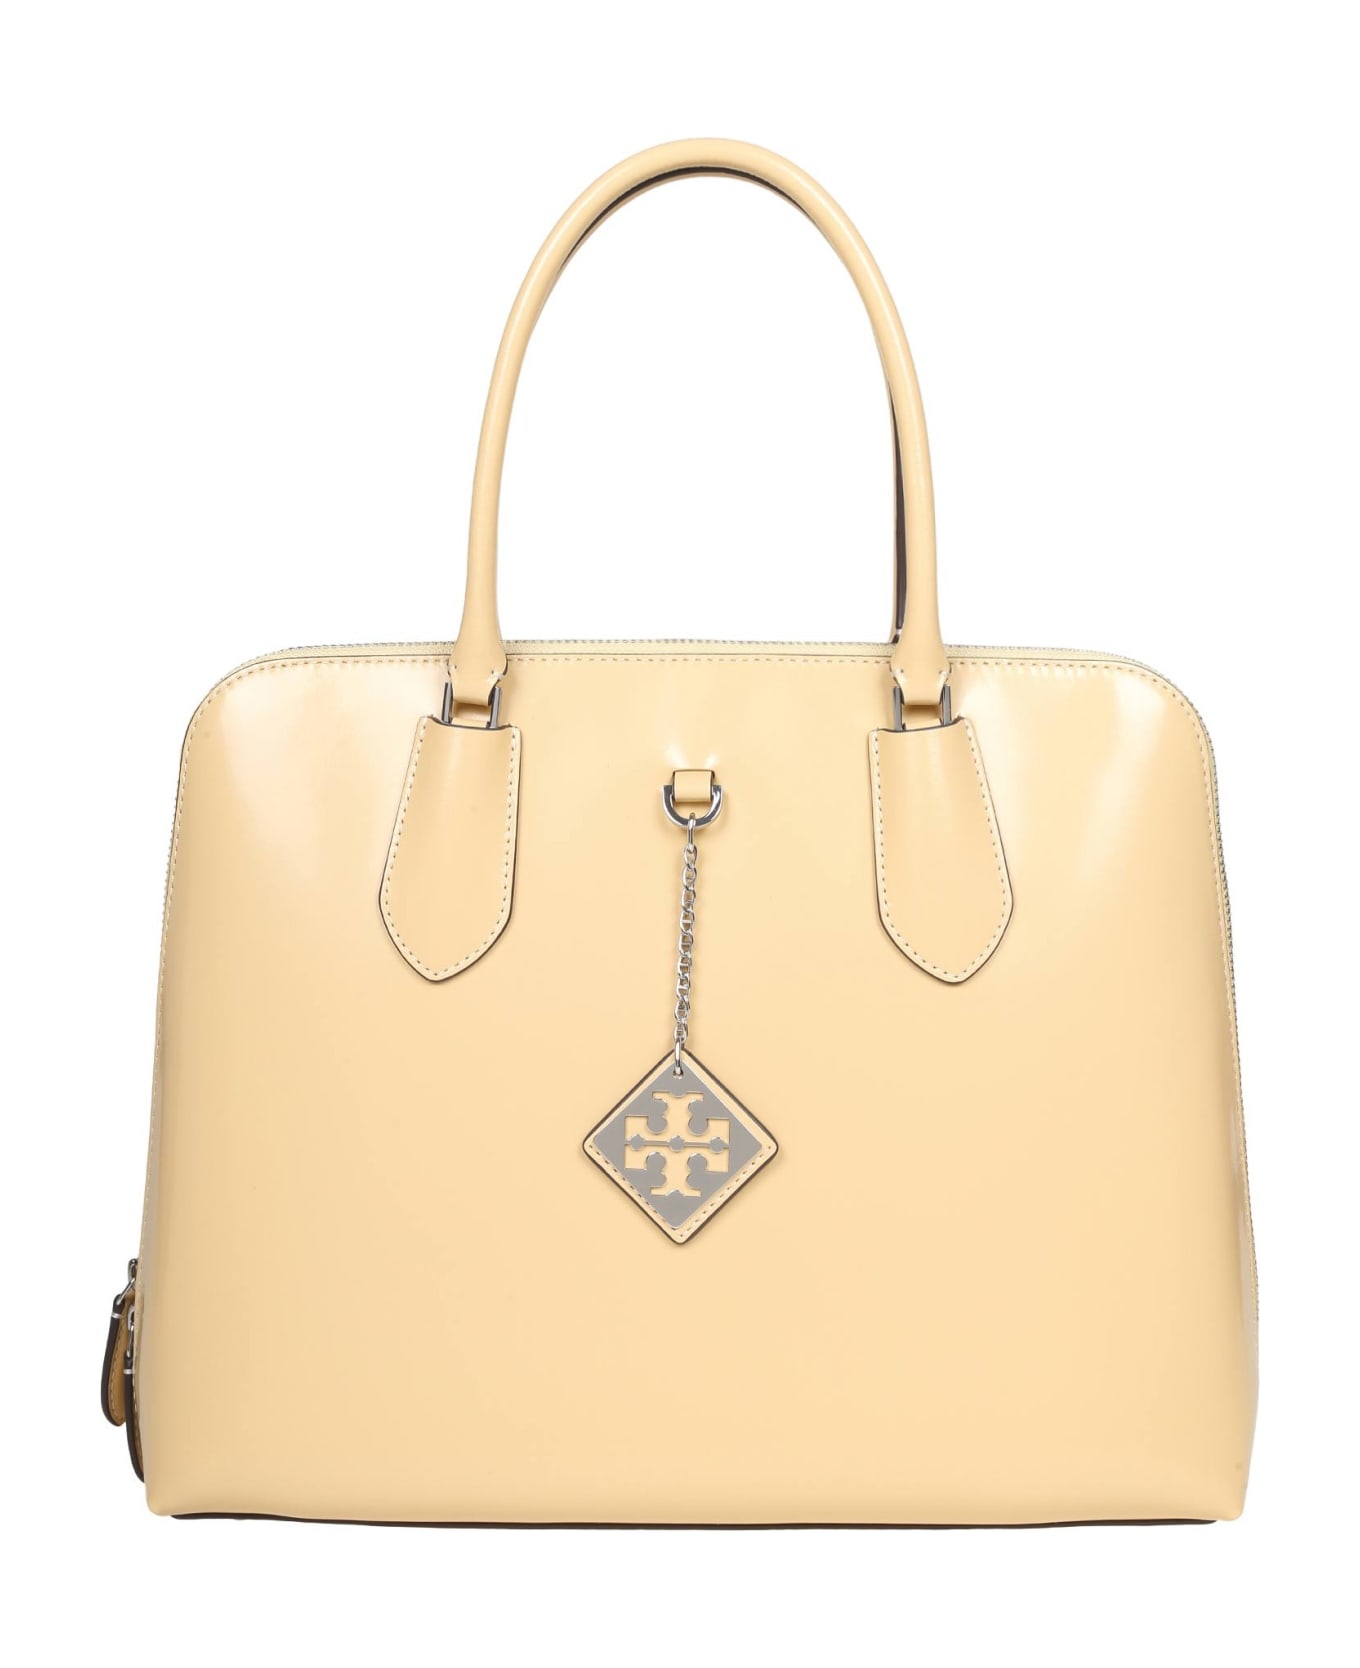 Tory Burch Swing Bag In Almond Brushed Leather - Almond トートバッグ